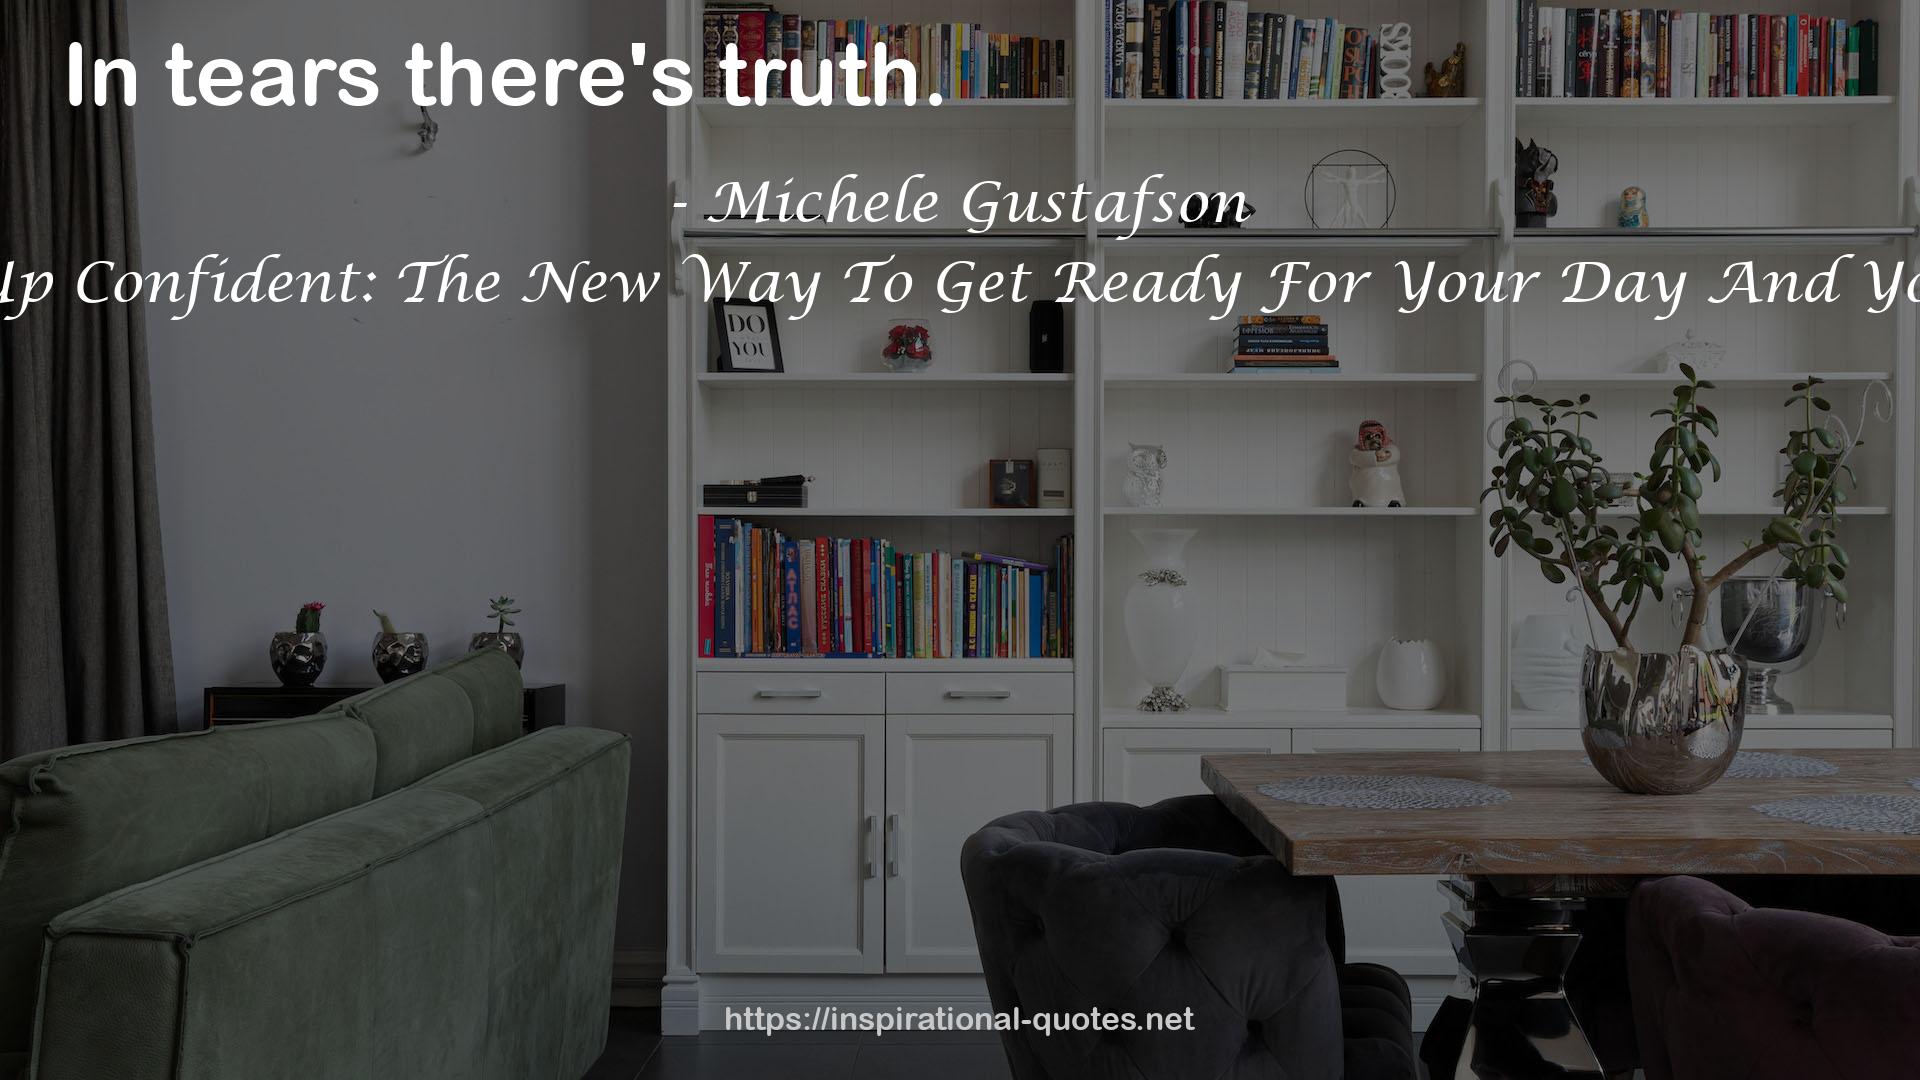 Michele Gustafson QUOTES